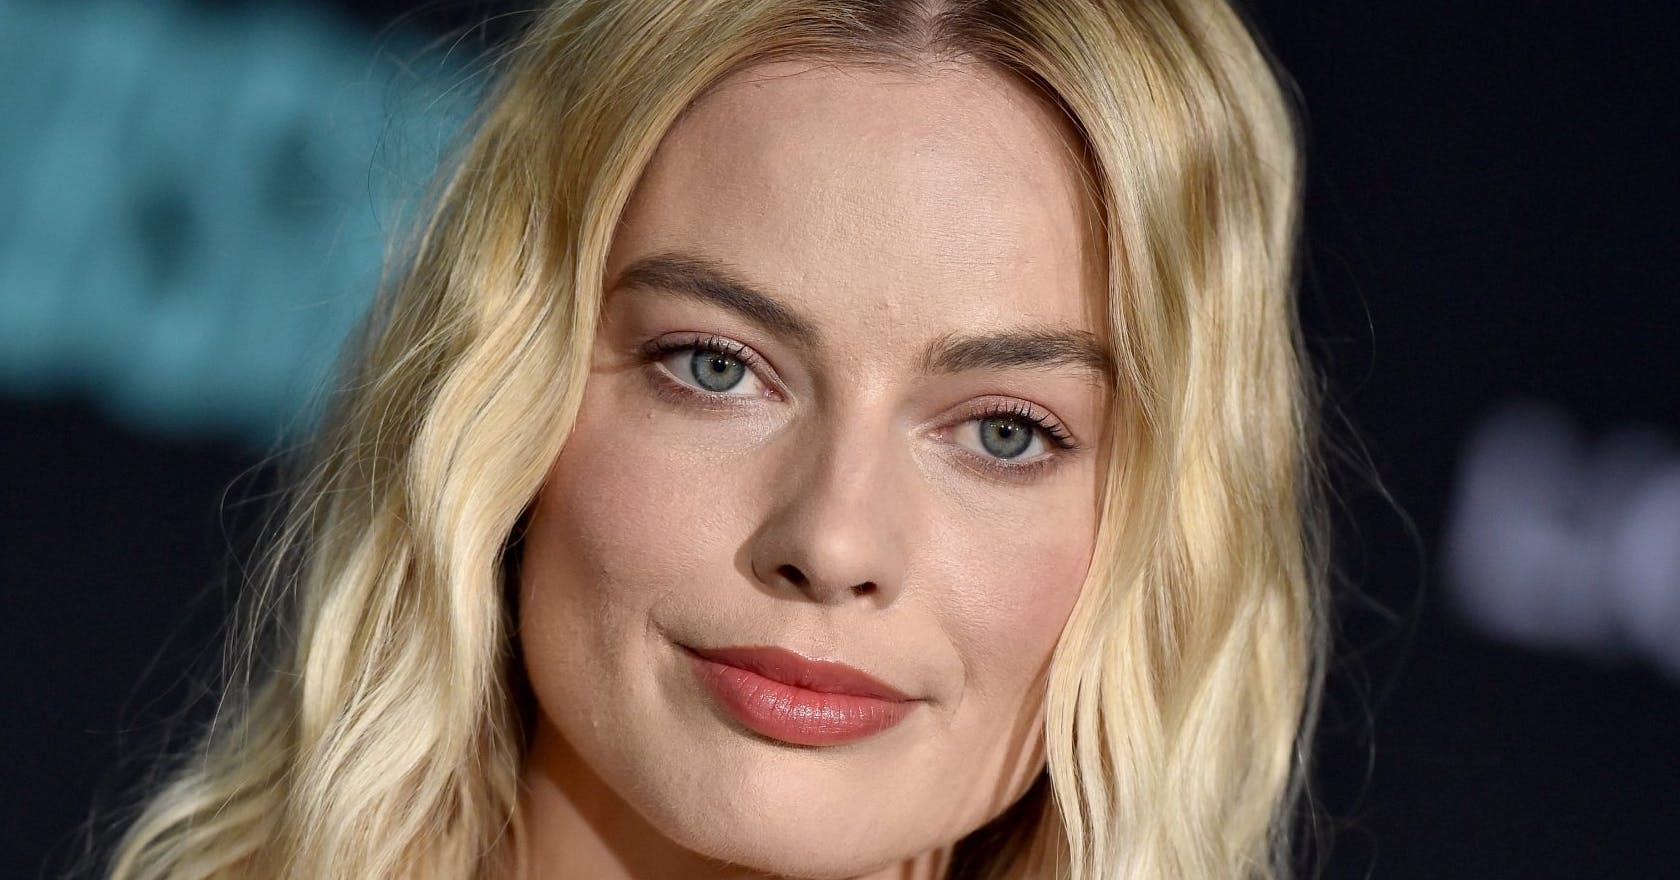 Why did Margot Robbie have a fake Twitter account?